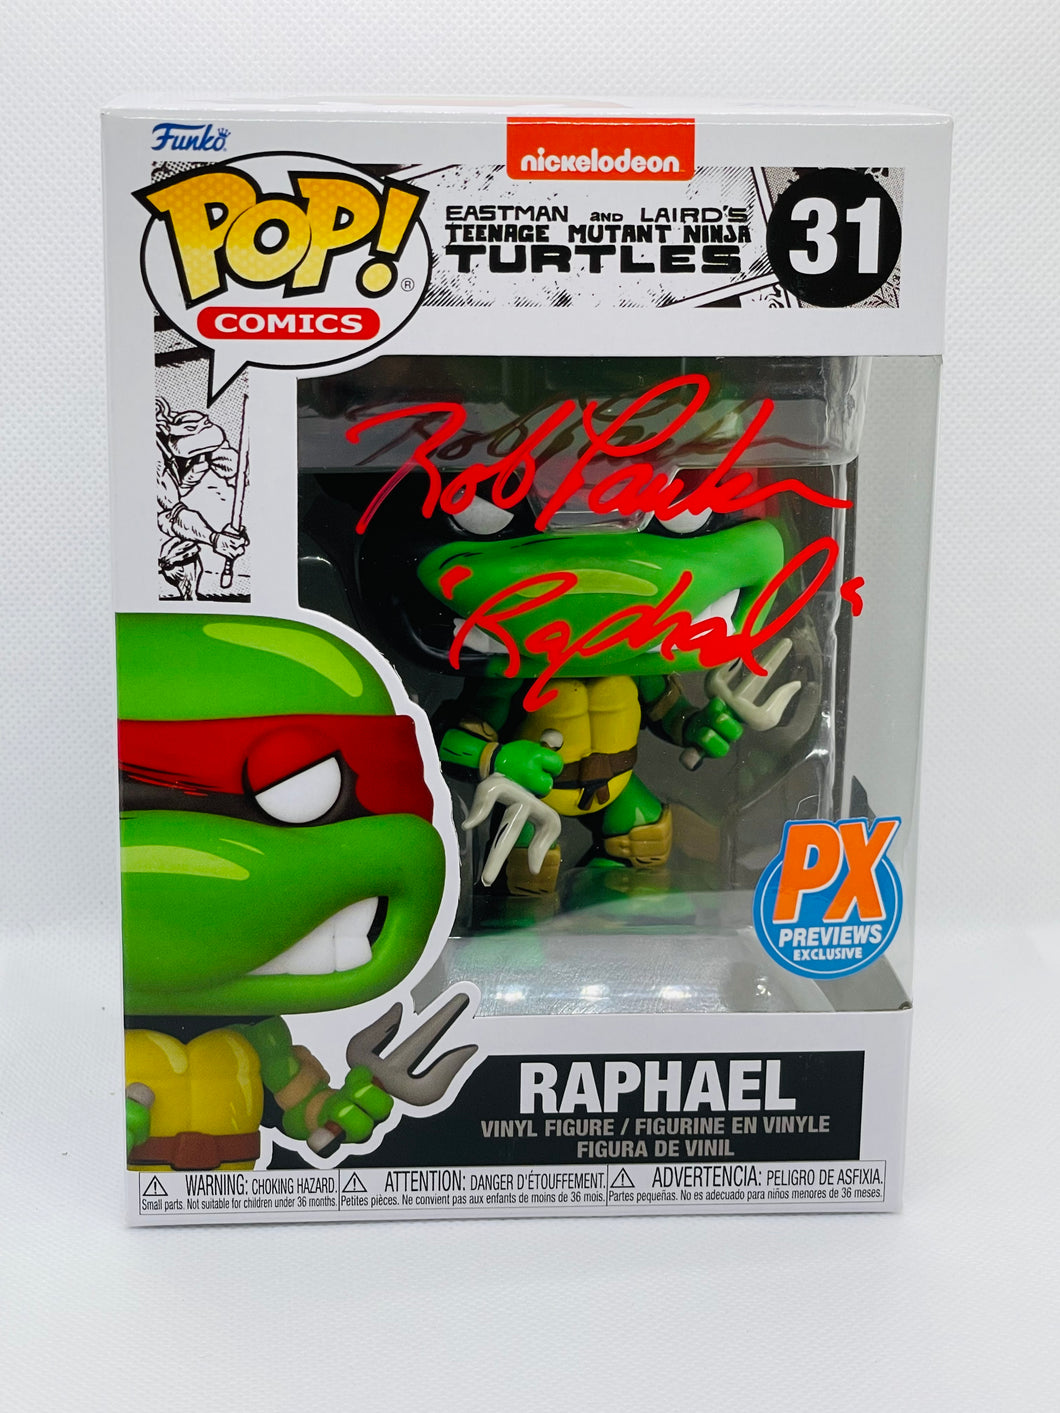 Raphael 31 Teenage Mutant Ninja Turtles PX Previews exclusive Funko Pop signed by Rob Paulsen with inscription 